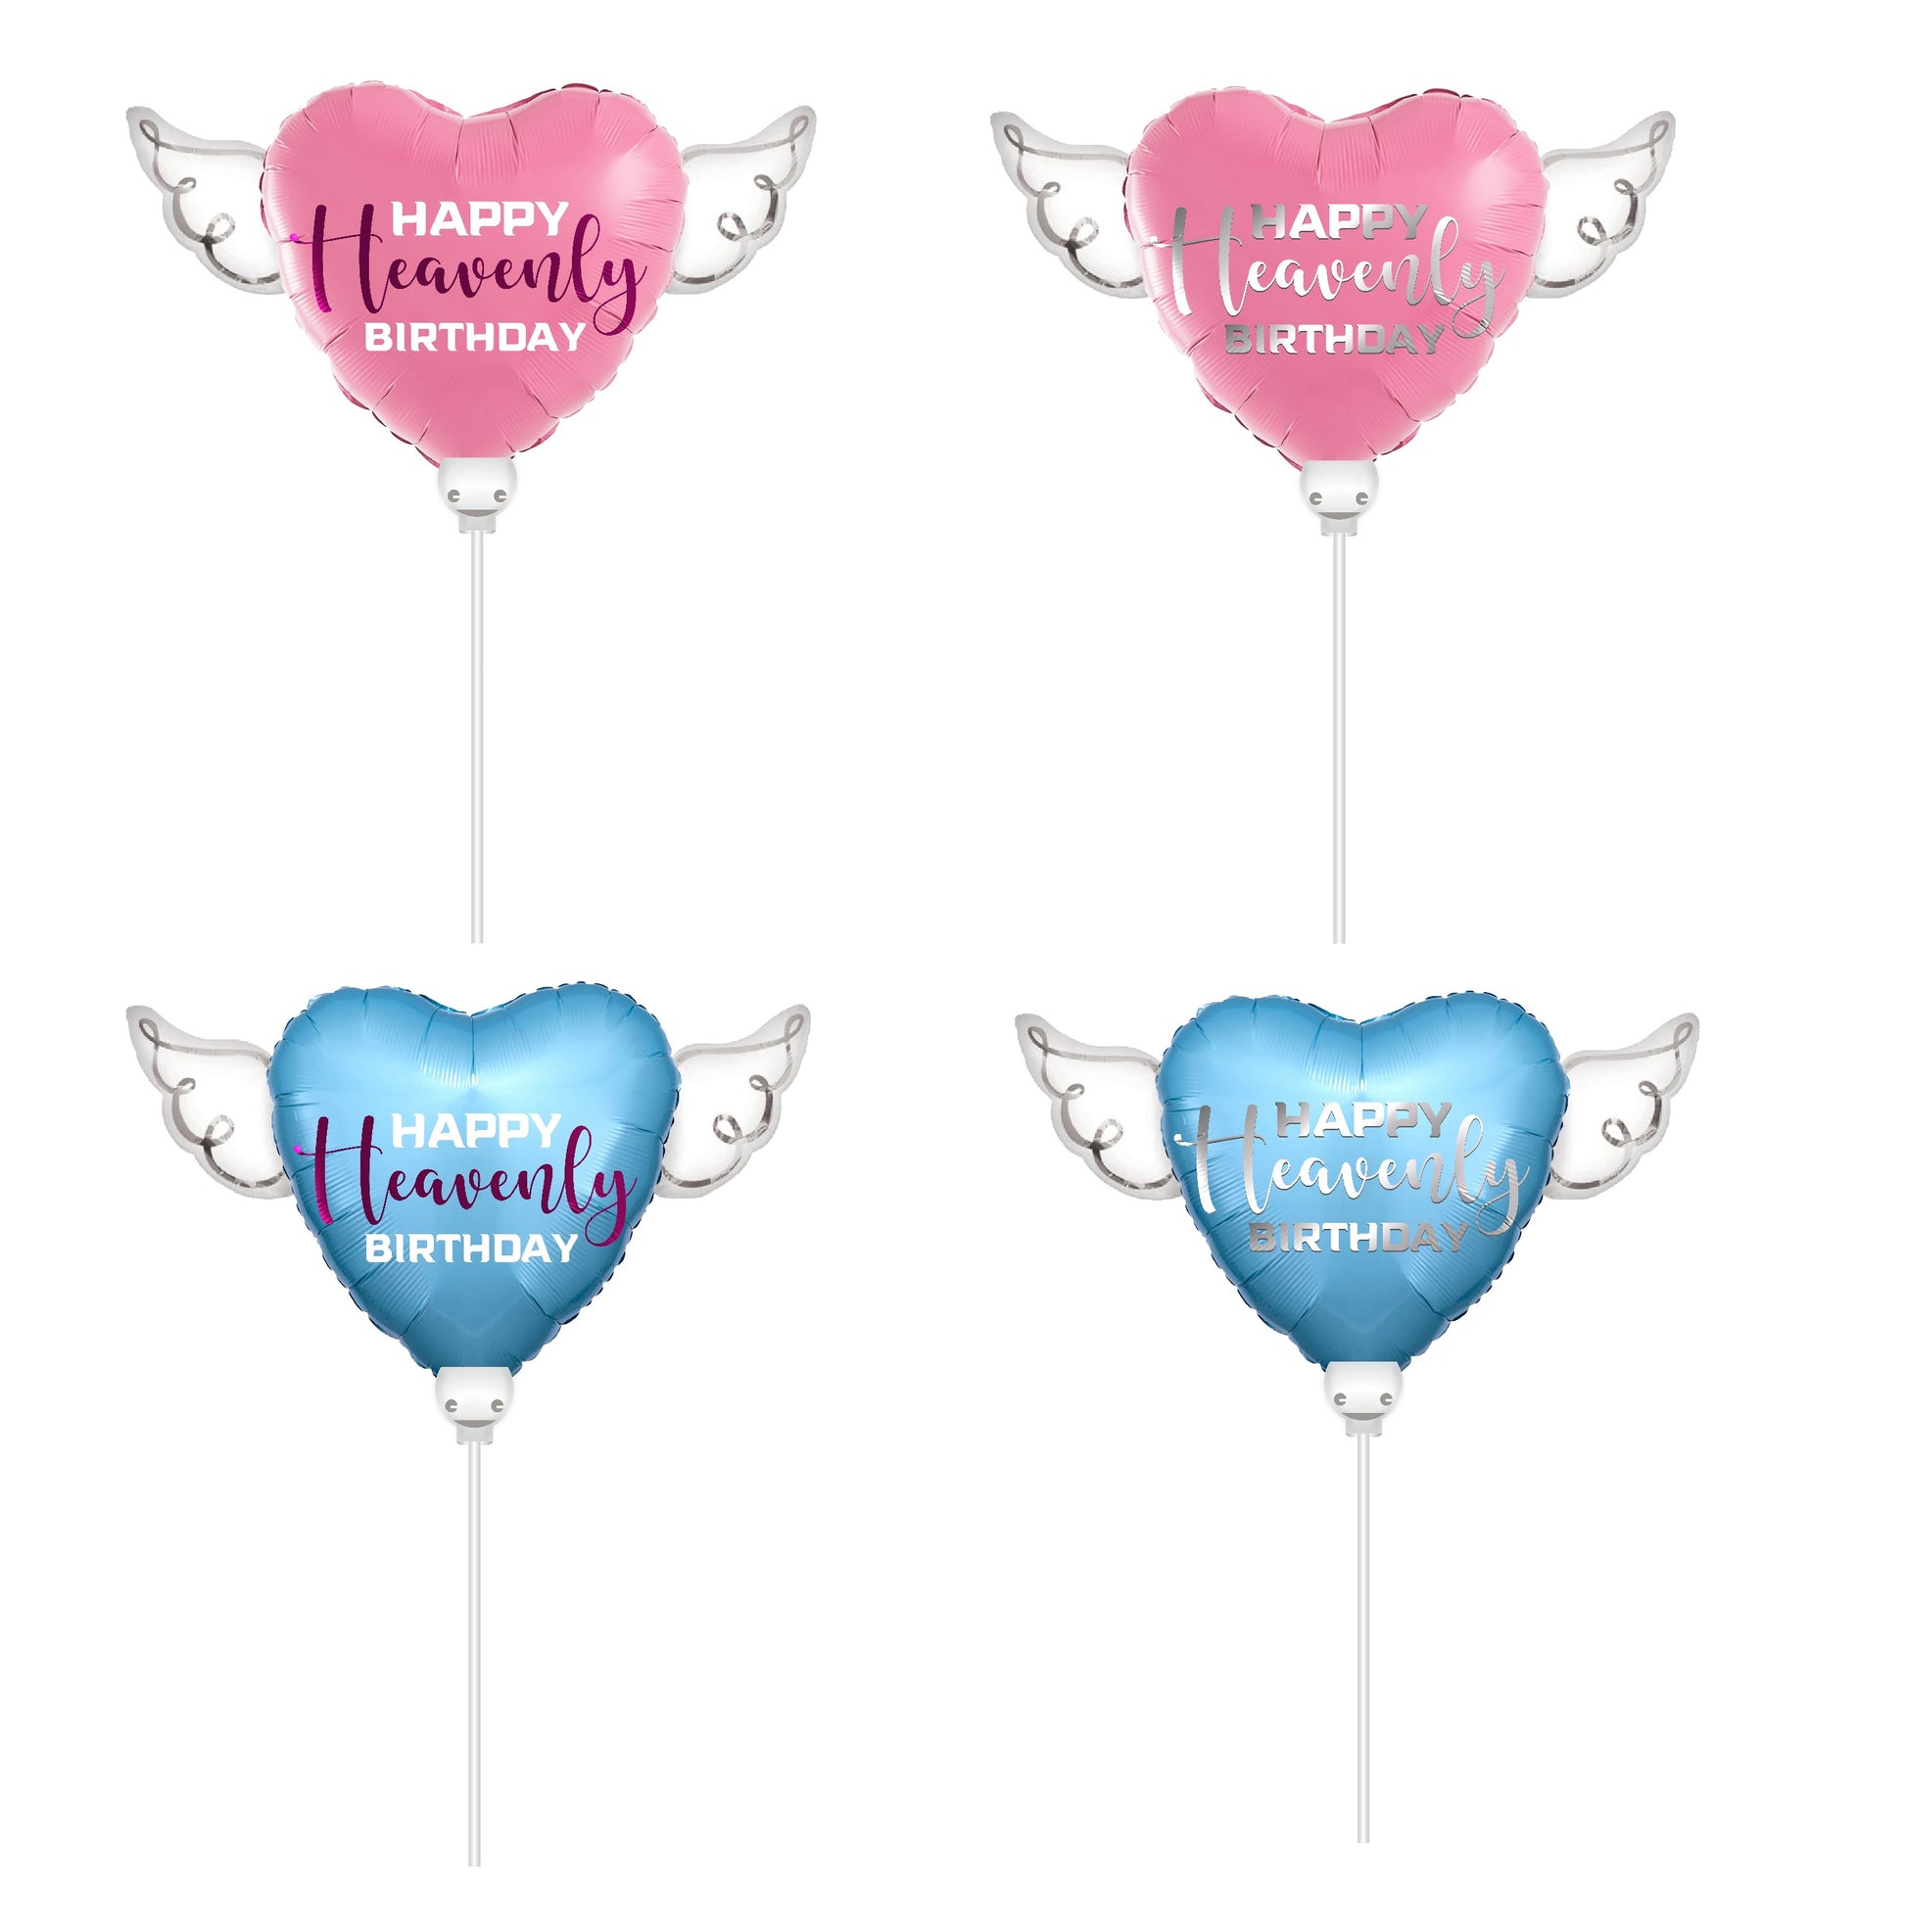 4-Pack Combo Happy Heavenly Birthday Balloons on a Stick Heart Shaped with angel wings